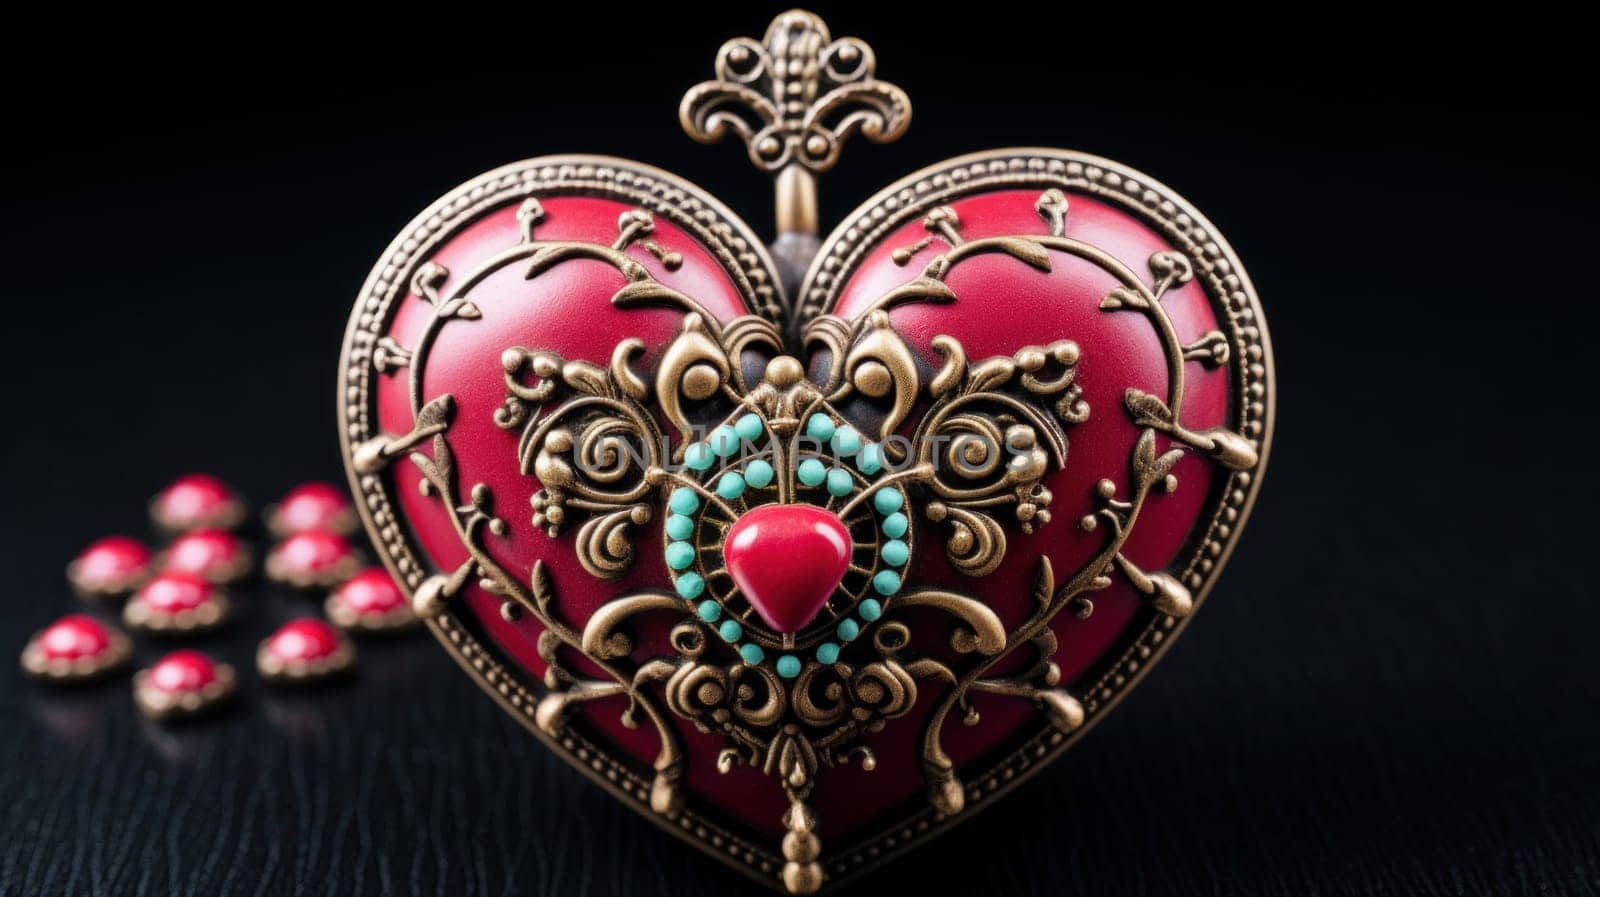 A red heart shaped box with turquoise stones on it